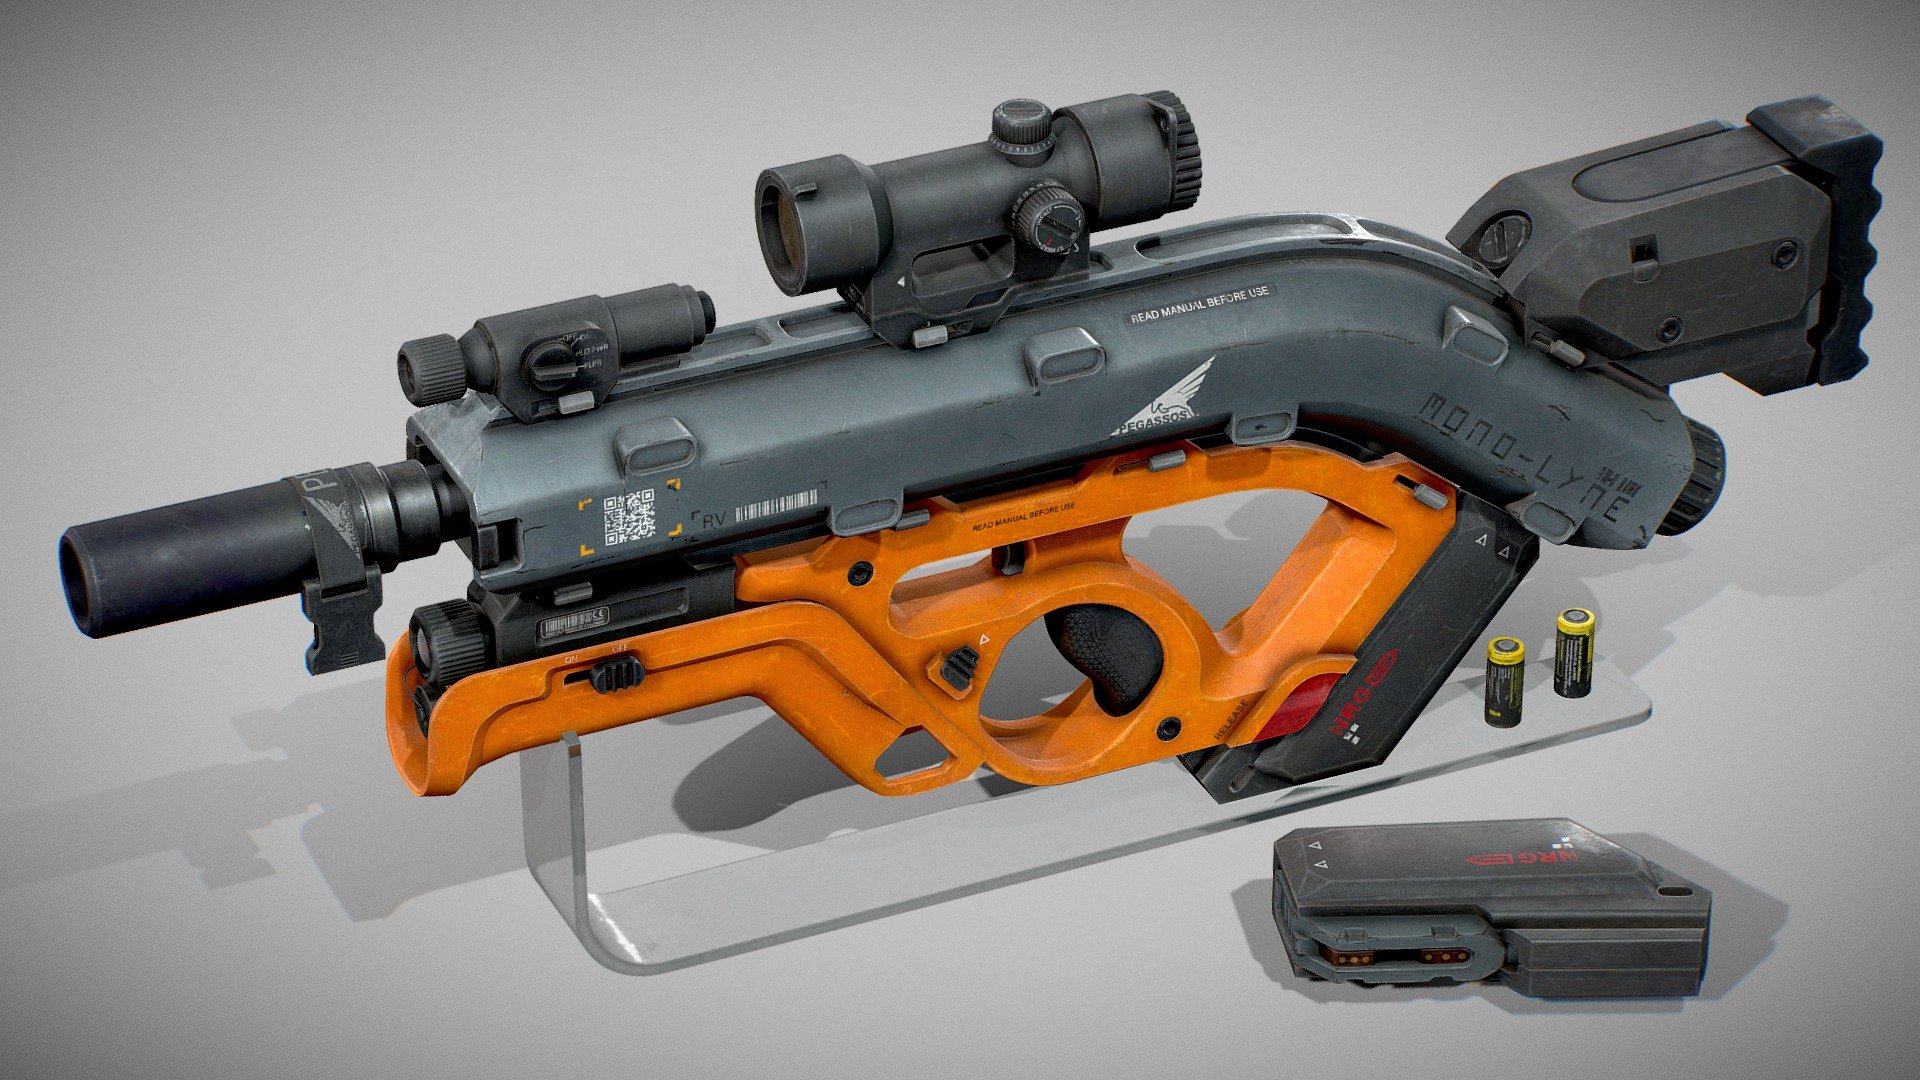 This project was done in collaboration with Rajan Verma.
https://www.artstation.com/rajan_verma

He was kind enough to provide the Base model.

Modular Rifle is based on concept art by the brilliant artist Kris Thaler.
https://www.artstation.com/kristhaler

It was a great experience working on the rifle.I used our creativity to add certain elements to make it more appealing. The goal of this artwork was to make it look realistic.I used lots of shading techniques to make it look great and be more versatile. This rifle is comprised of four texture sets.

Thank you once again to Rajan for the model. I am very thankful to my friends who gave me their valuable feedback on this project.

For more Render visit my artstation: https://www.artstation.com/taufeeq

Hope you like it ^ - ^ - Mono-Lyne Rifle - 3D model by taufeeqali (@taufeeq) 3d model